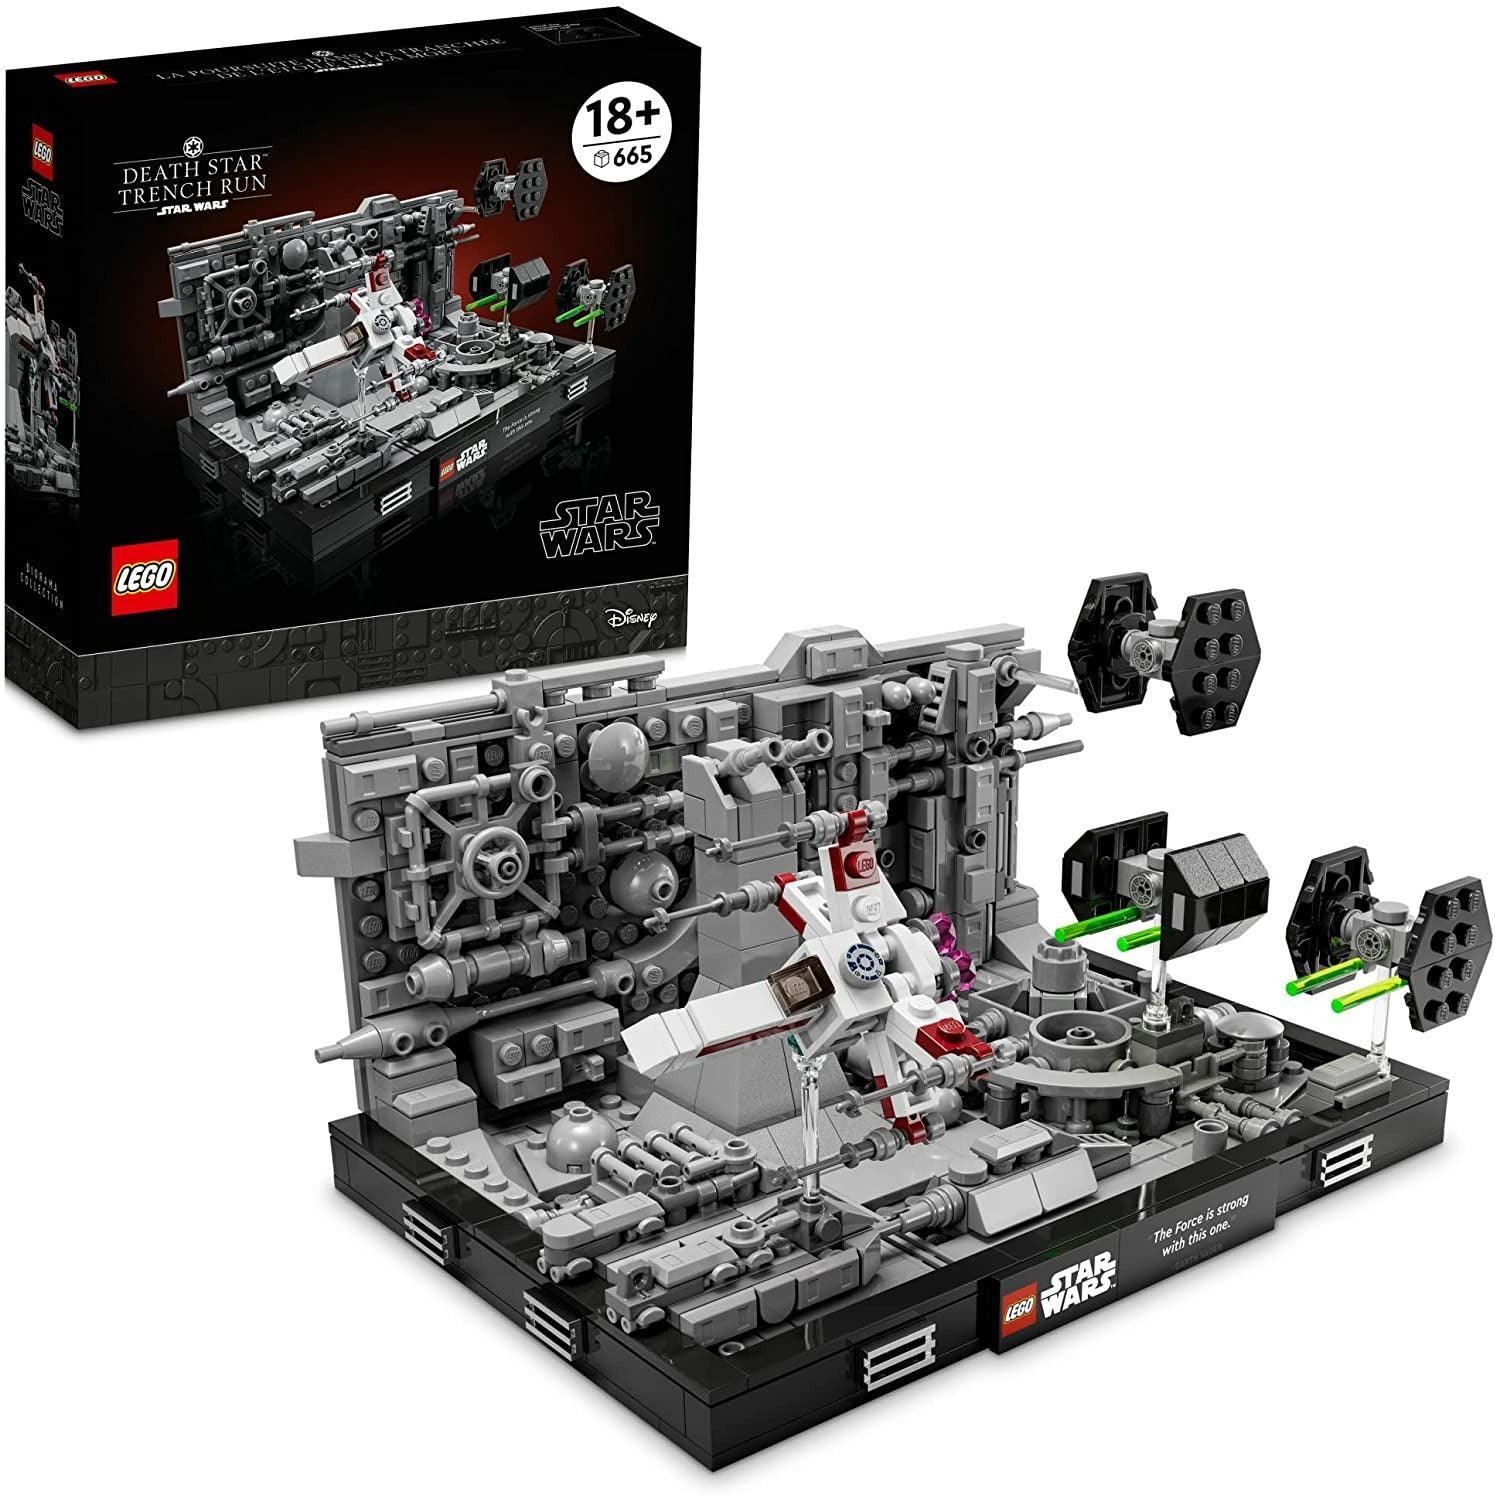 LEGO Star Wars Death Star Trench Run Diorama 75329 Building Kit for Adults; Brick-Built Collectible for Display (665 Pieces) - BumbleToys - 8+ Years, 8-13 Years, Boys, LEGO, Mandalorian, OXE, Pre-Order, star wars